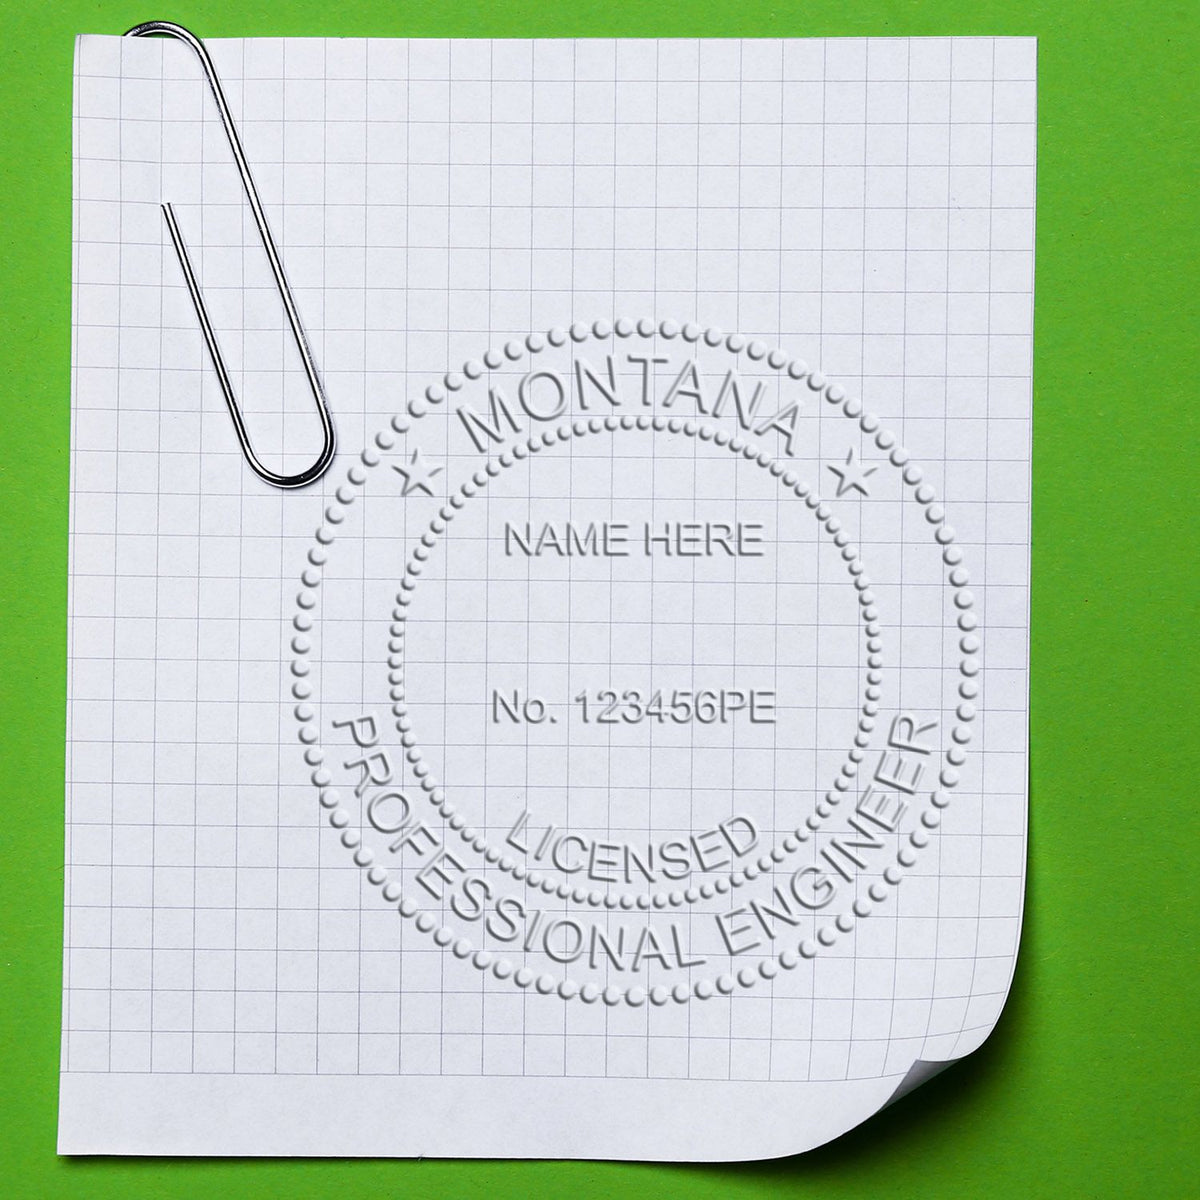 A photograph of the Montana Engineer Desk Seal stamp impression reveals a vivid, professional image of the on paper.